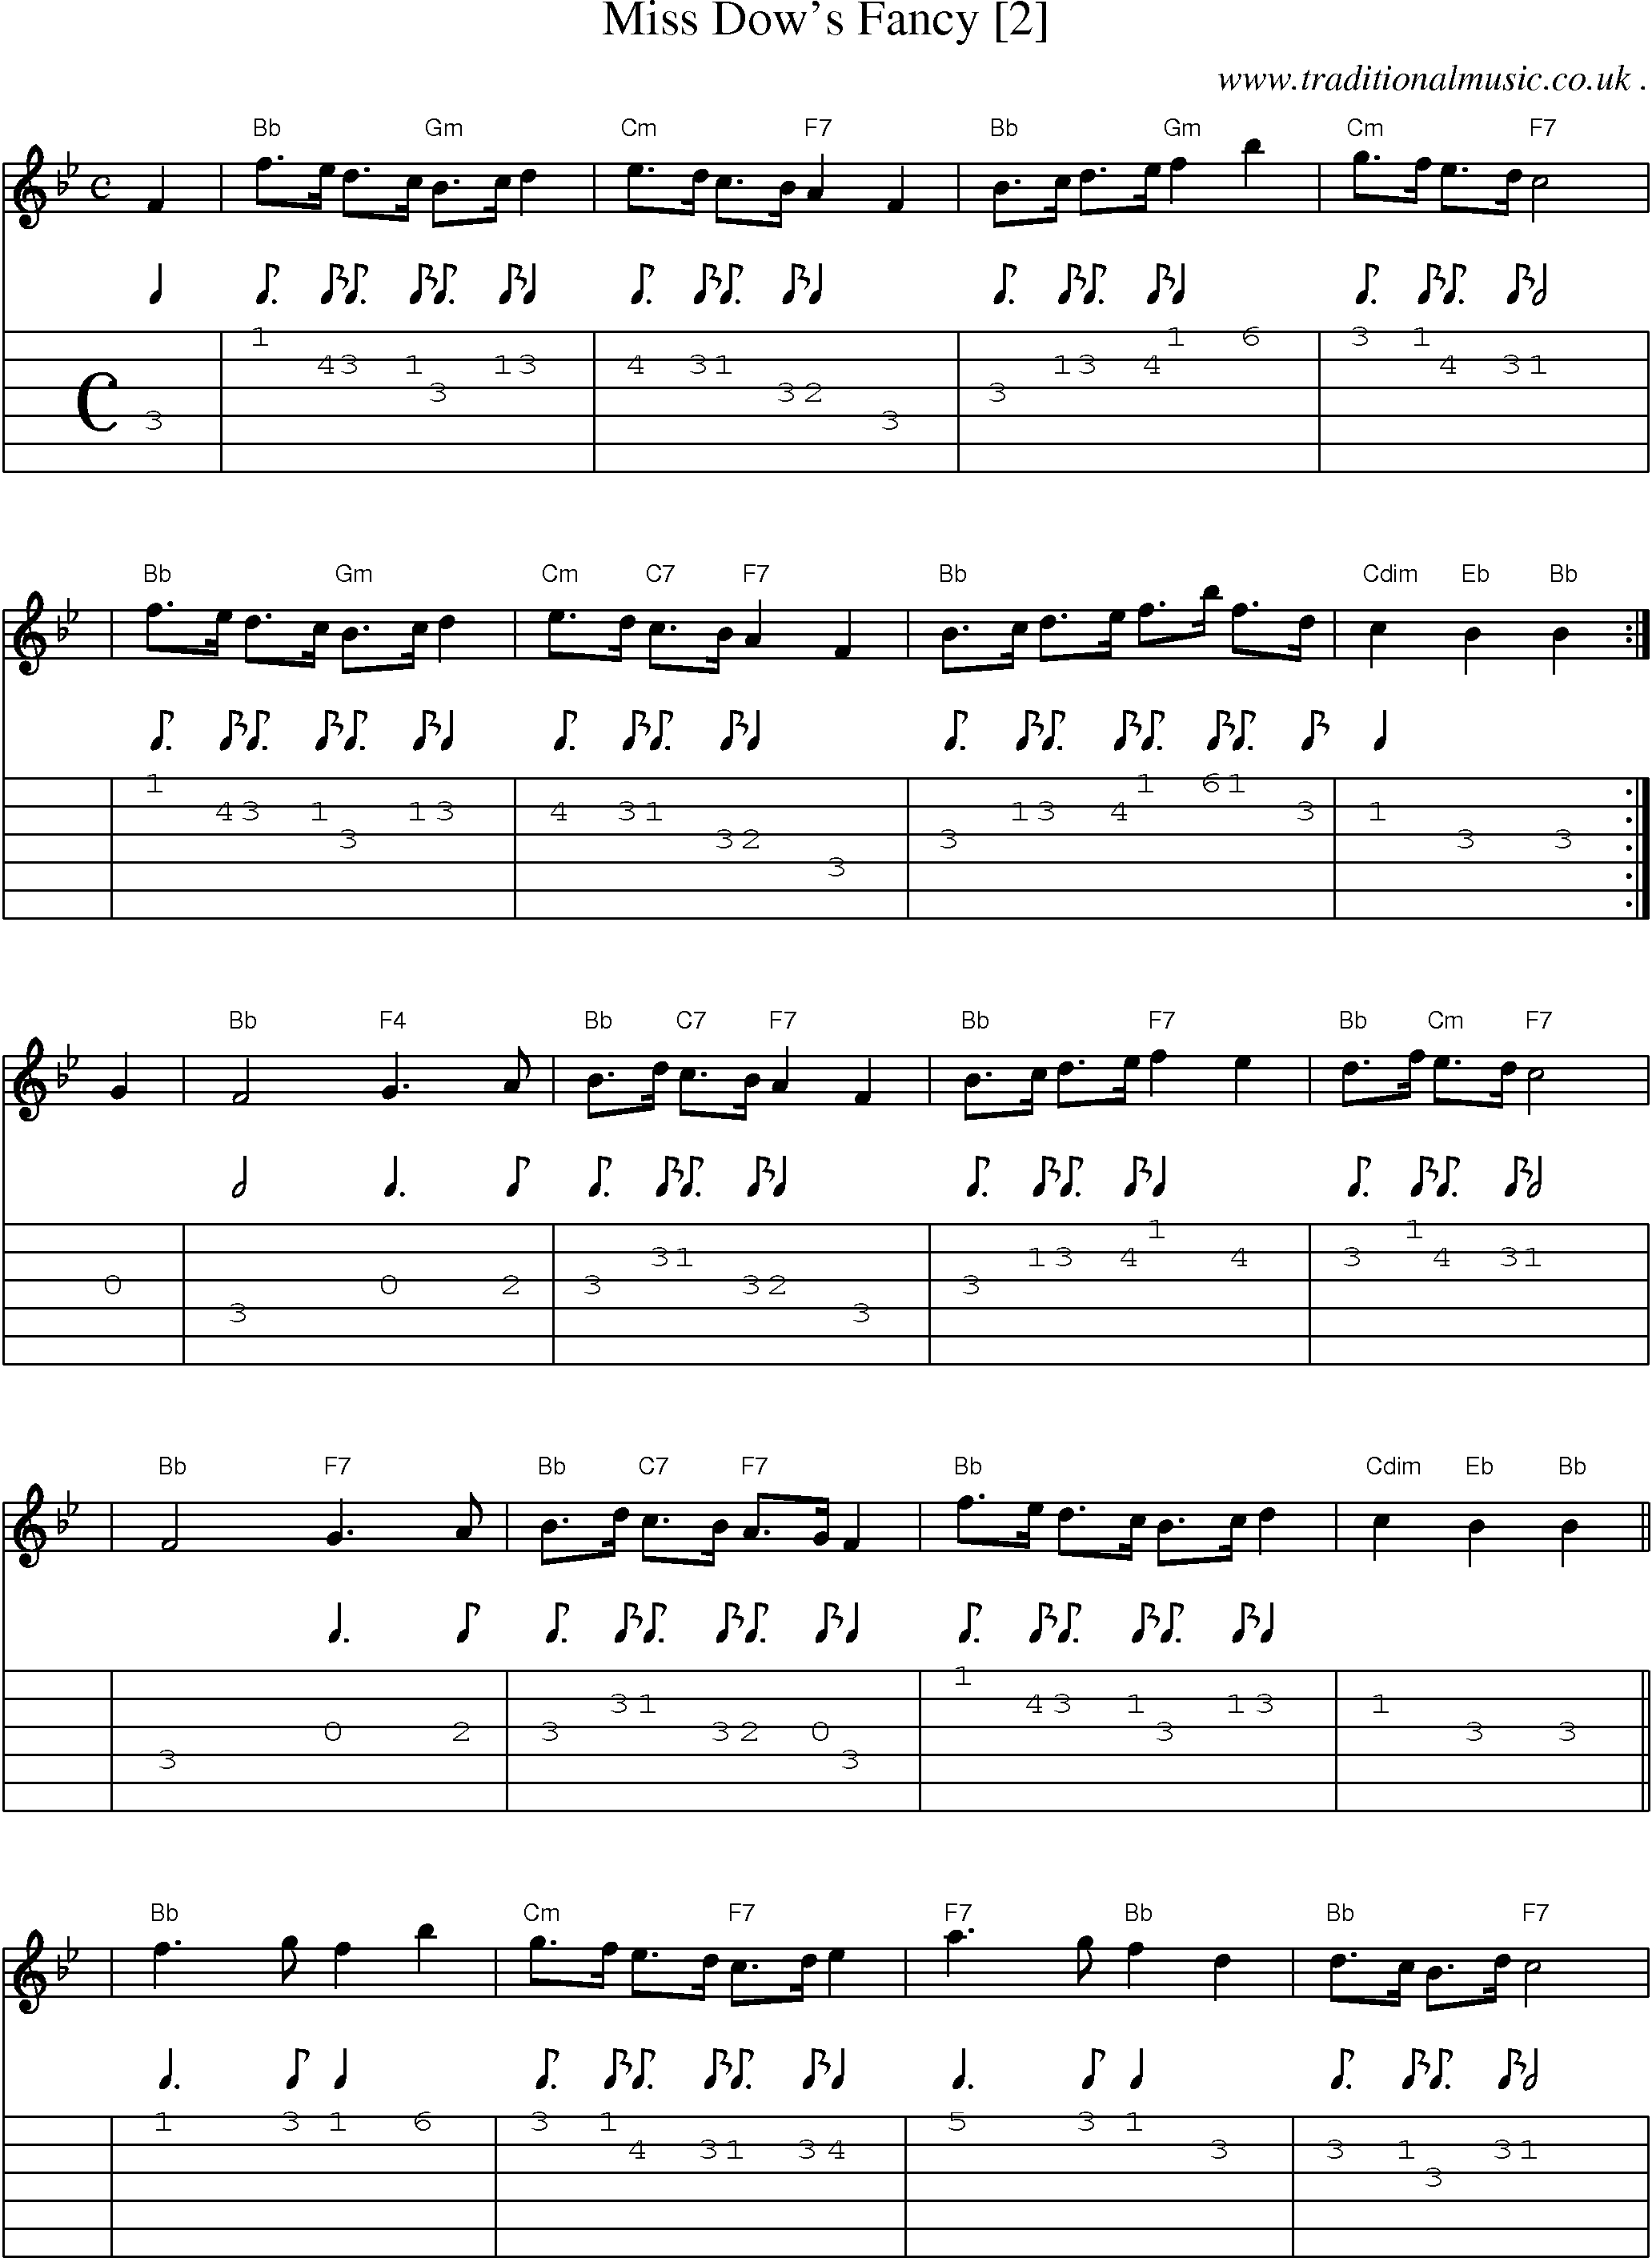 Sheet-music  score, Chords and Guitar Tabs for Miss Dows Fancy [2]